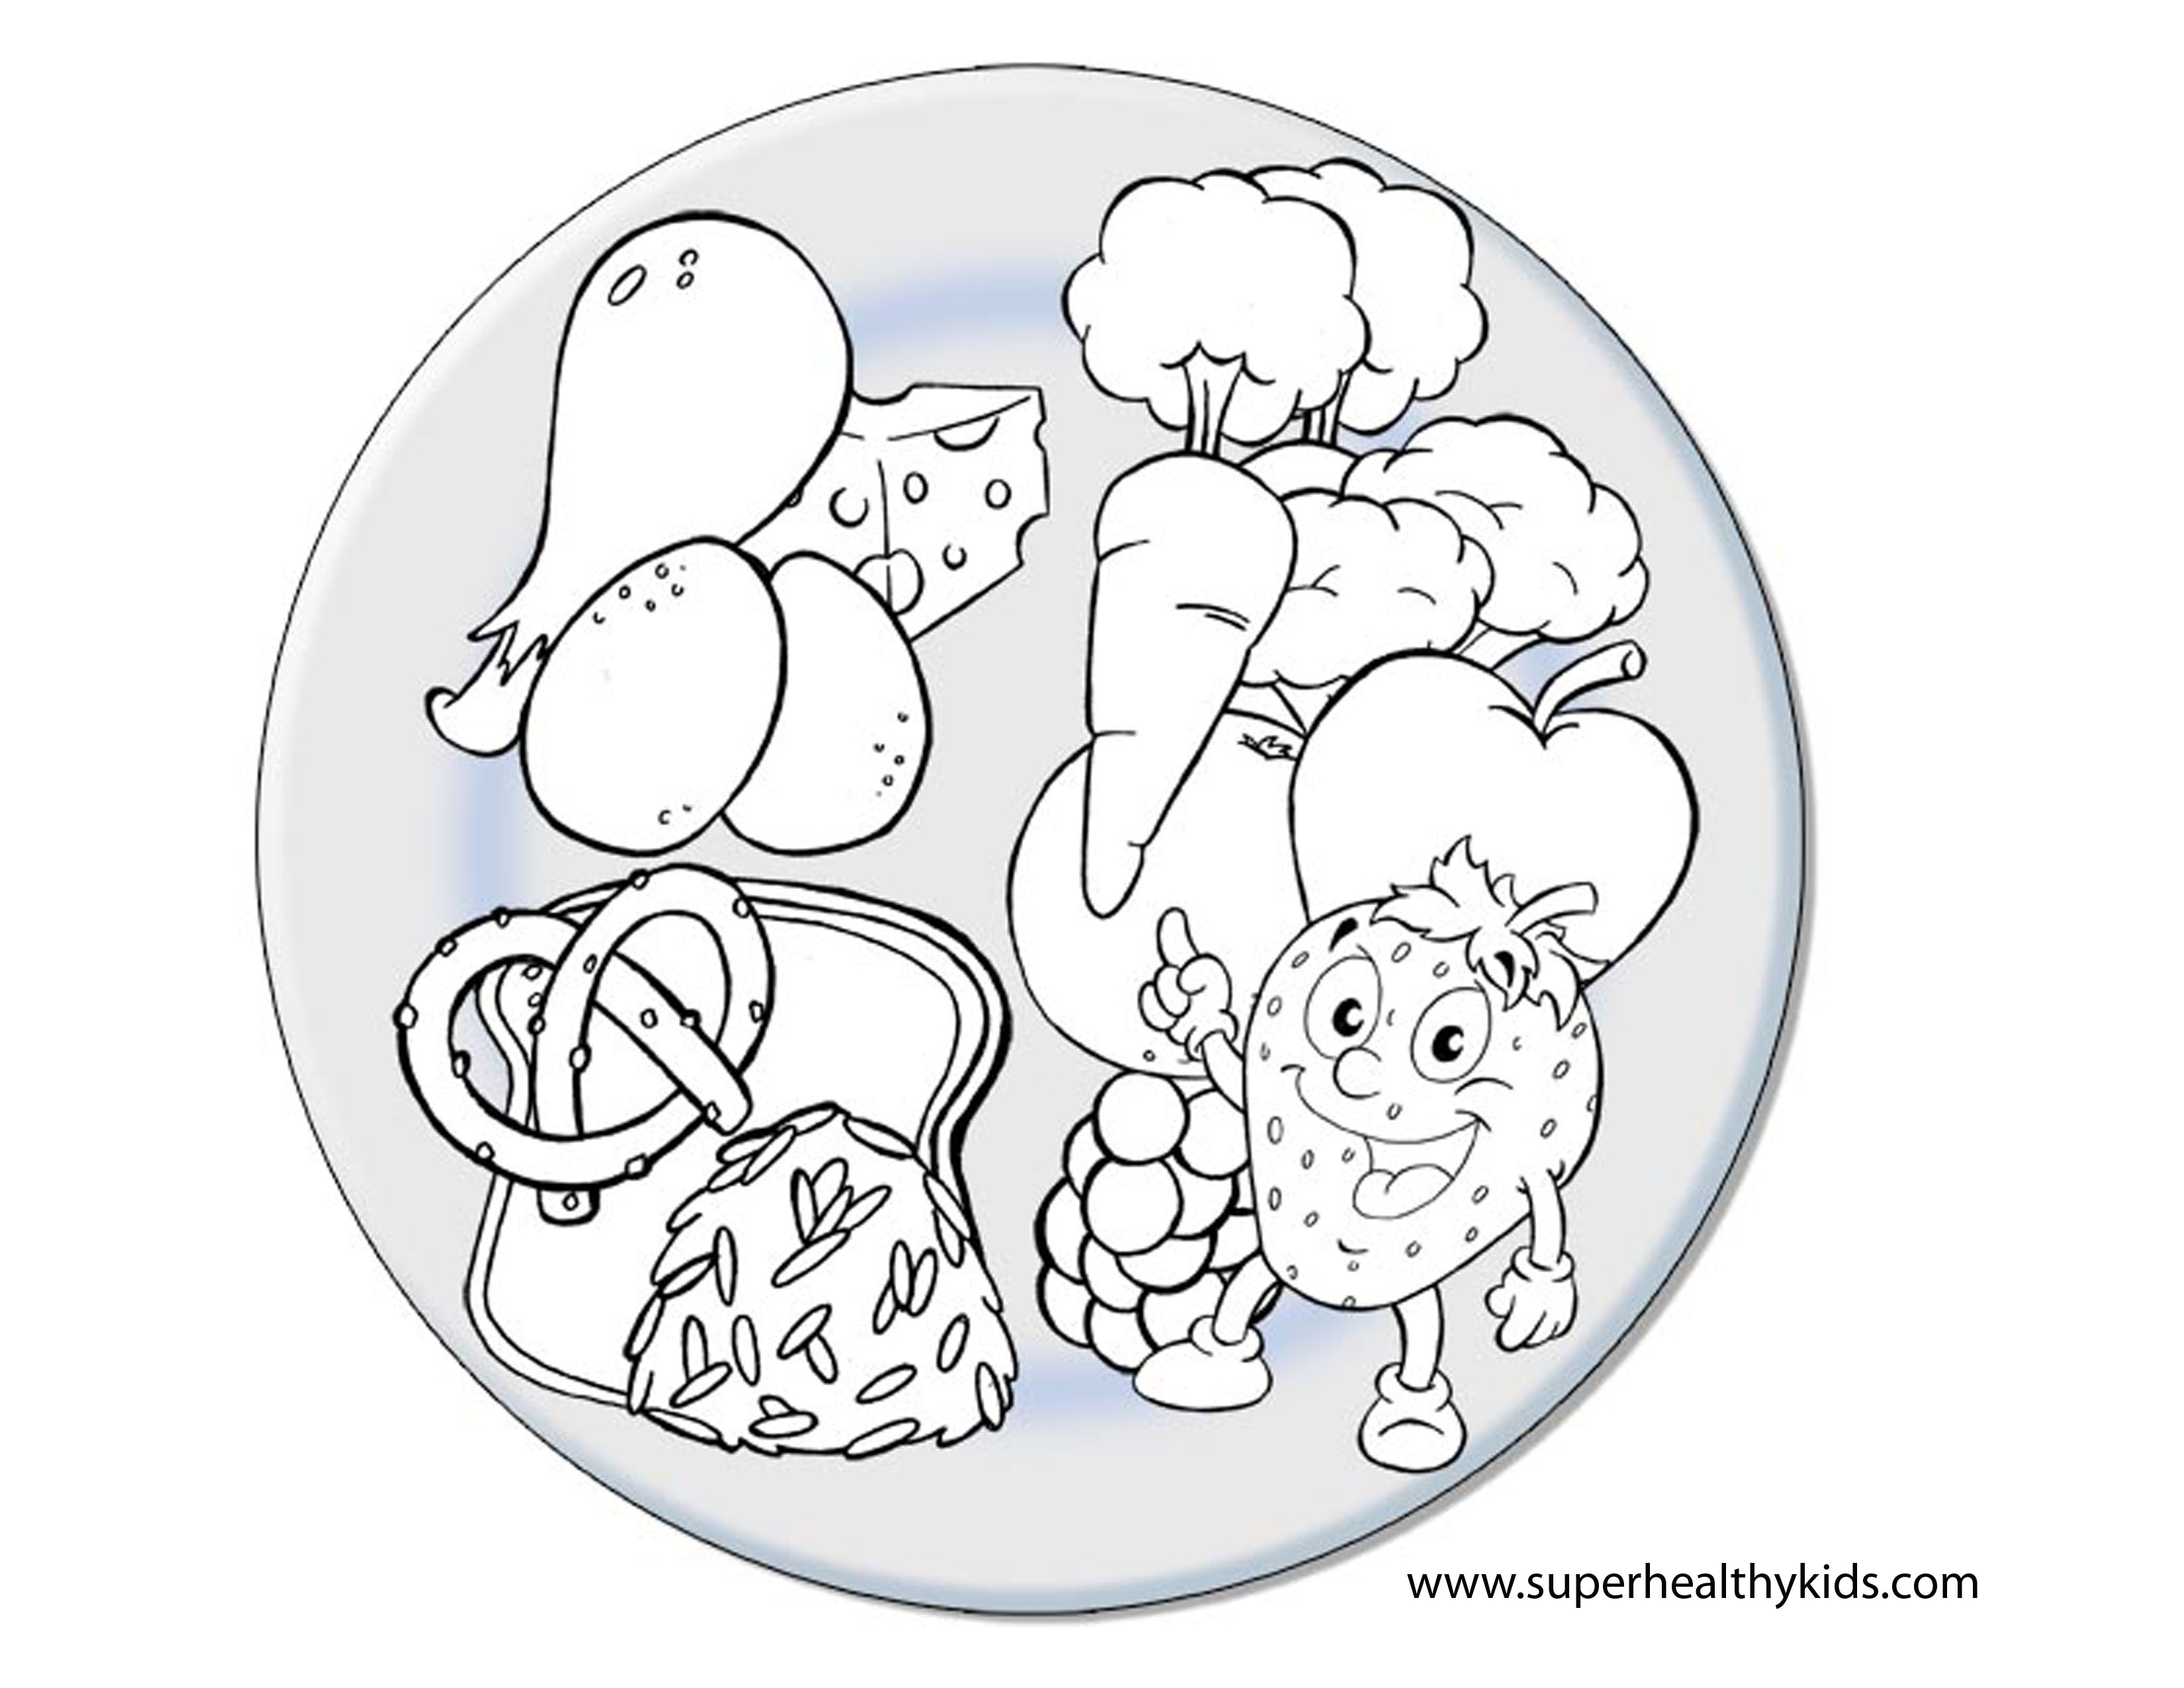 Healthy Kids My Plate Printable Activity